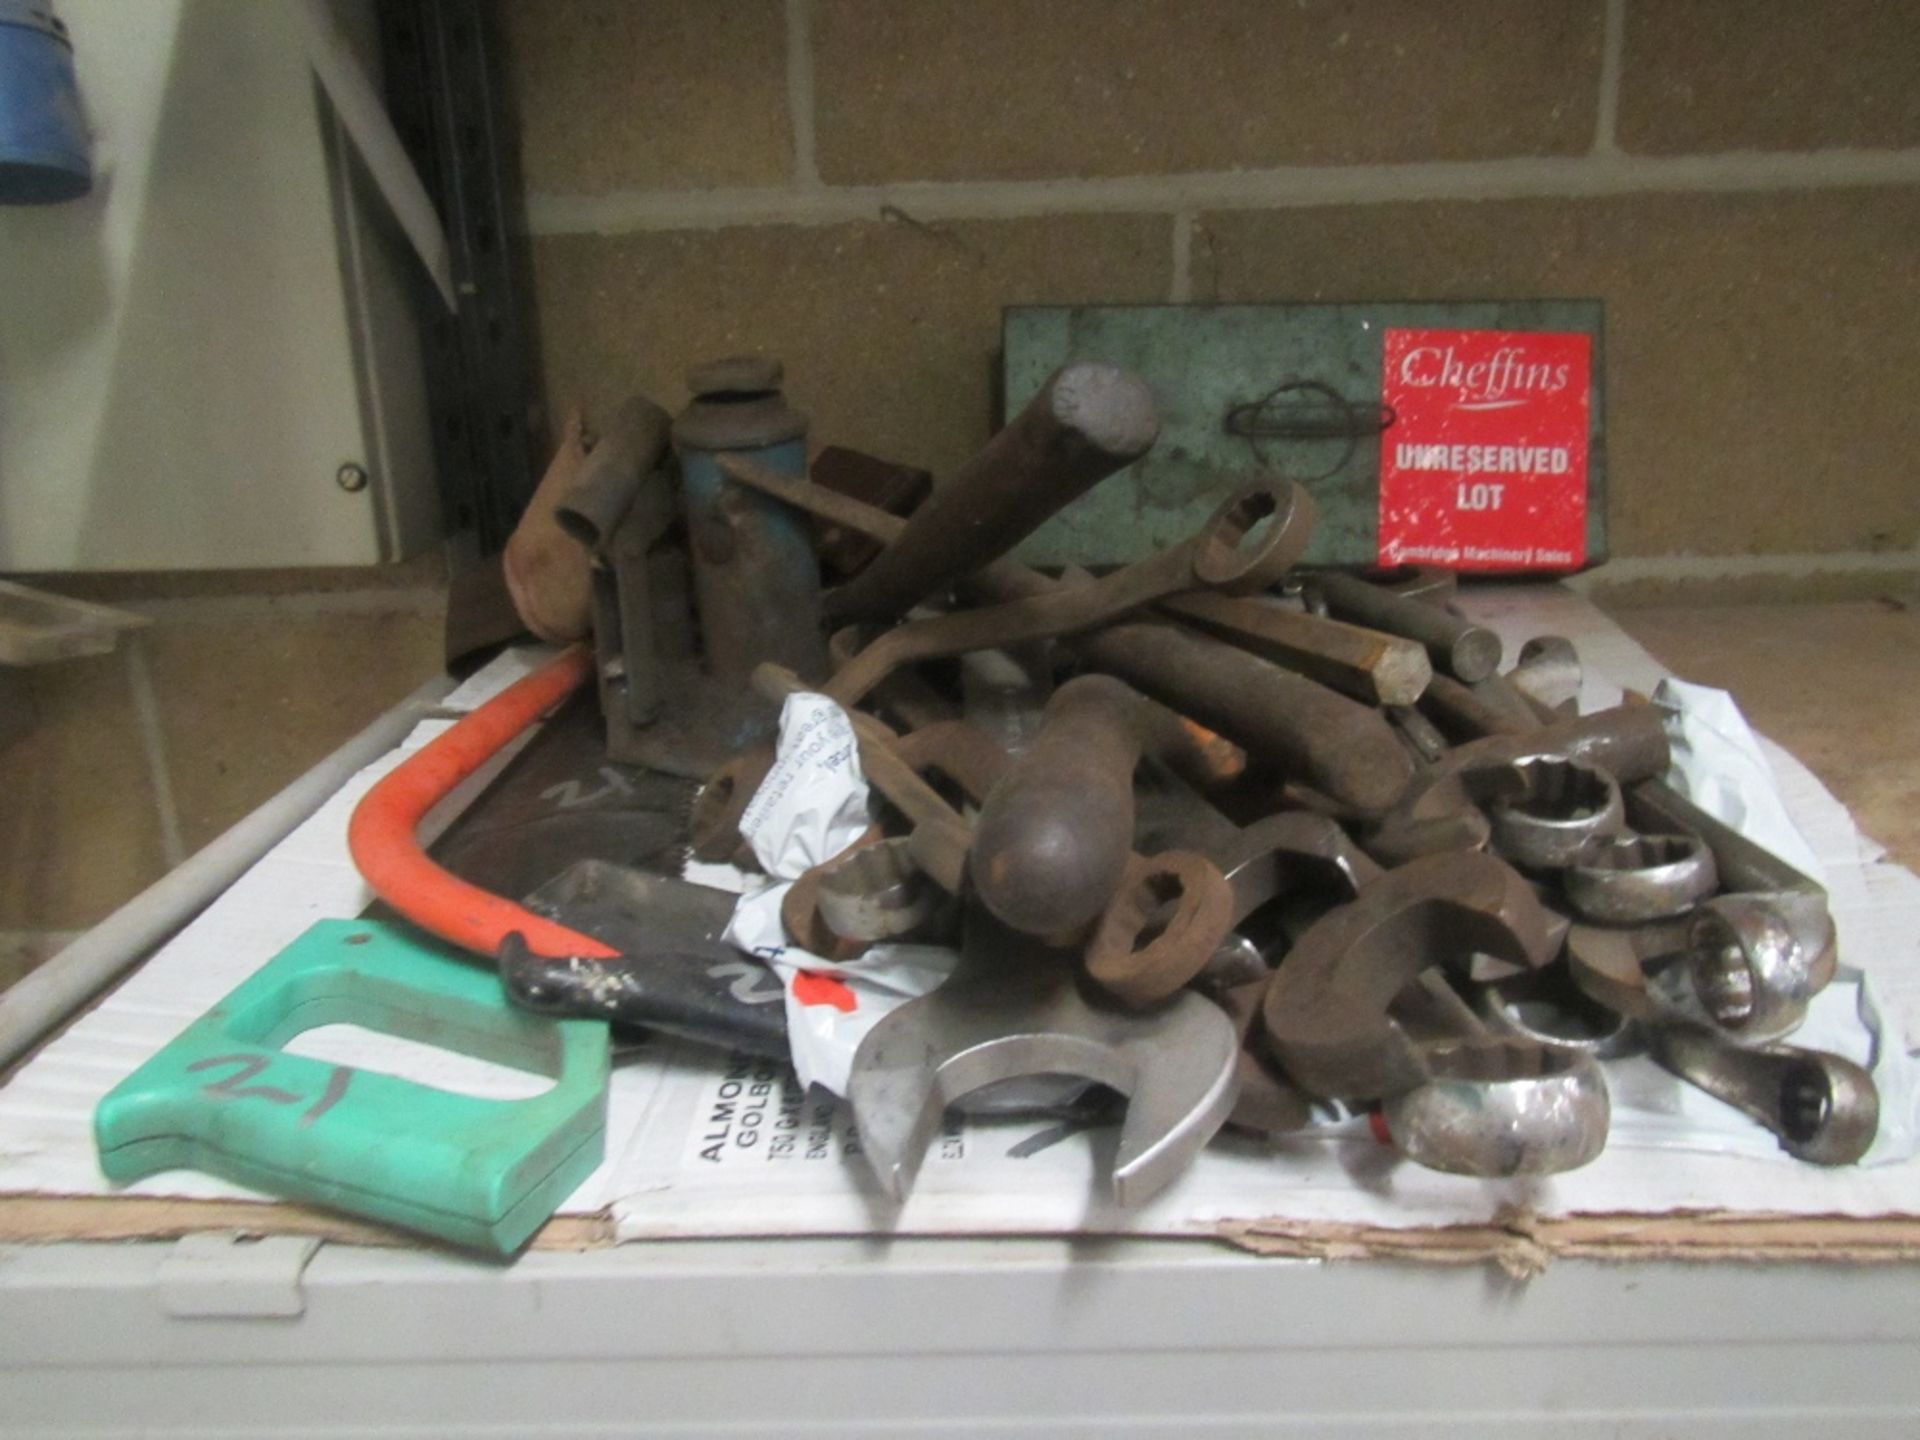 Assorted Spanners etc UNRESERVED LOT - Image 2 of 2